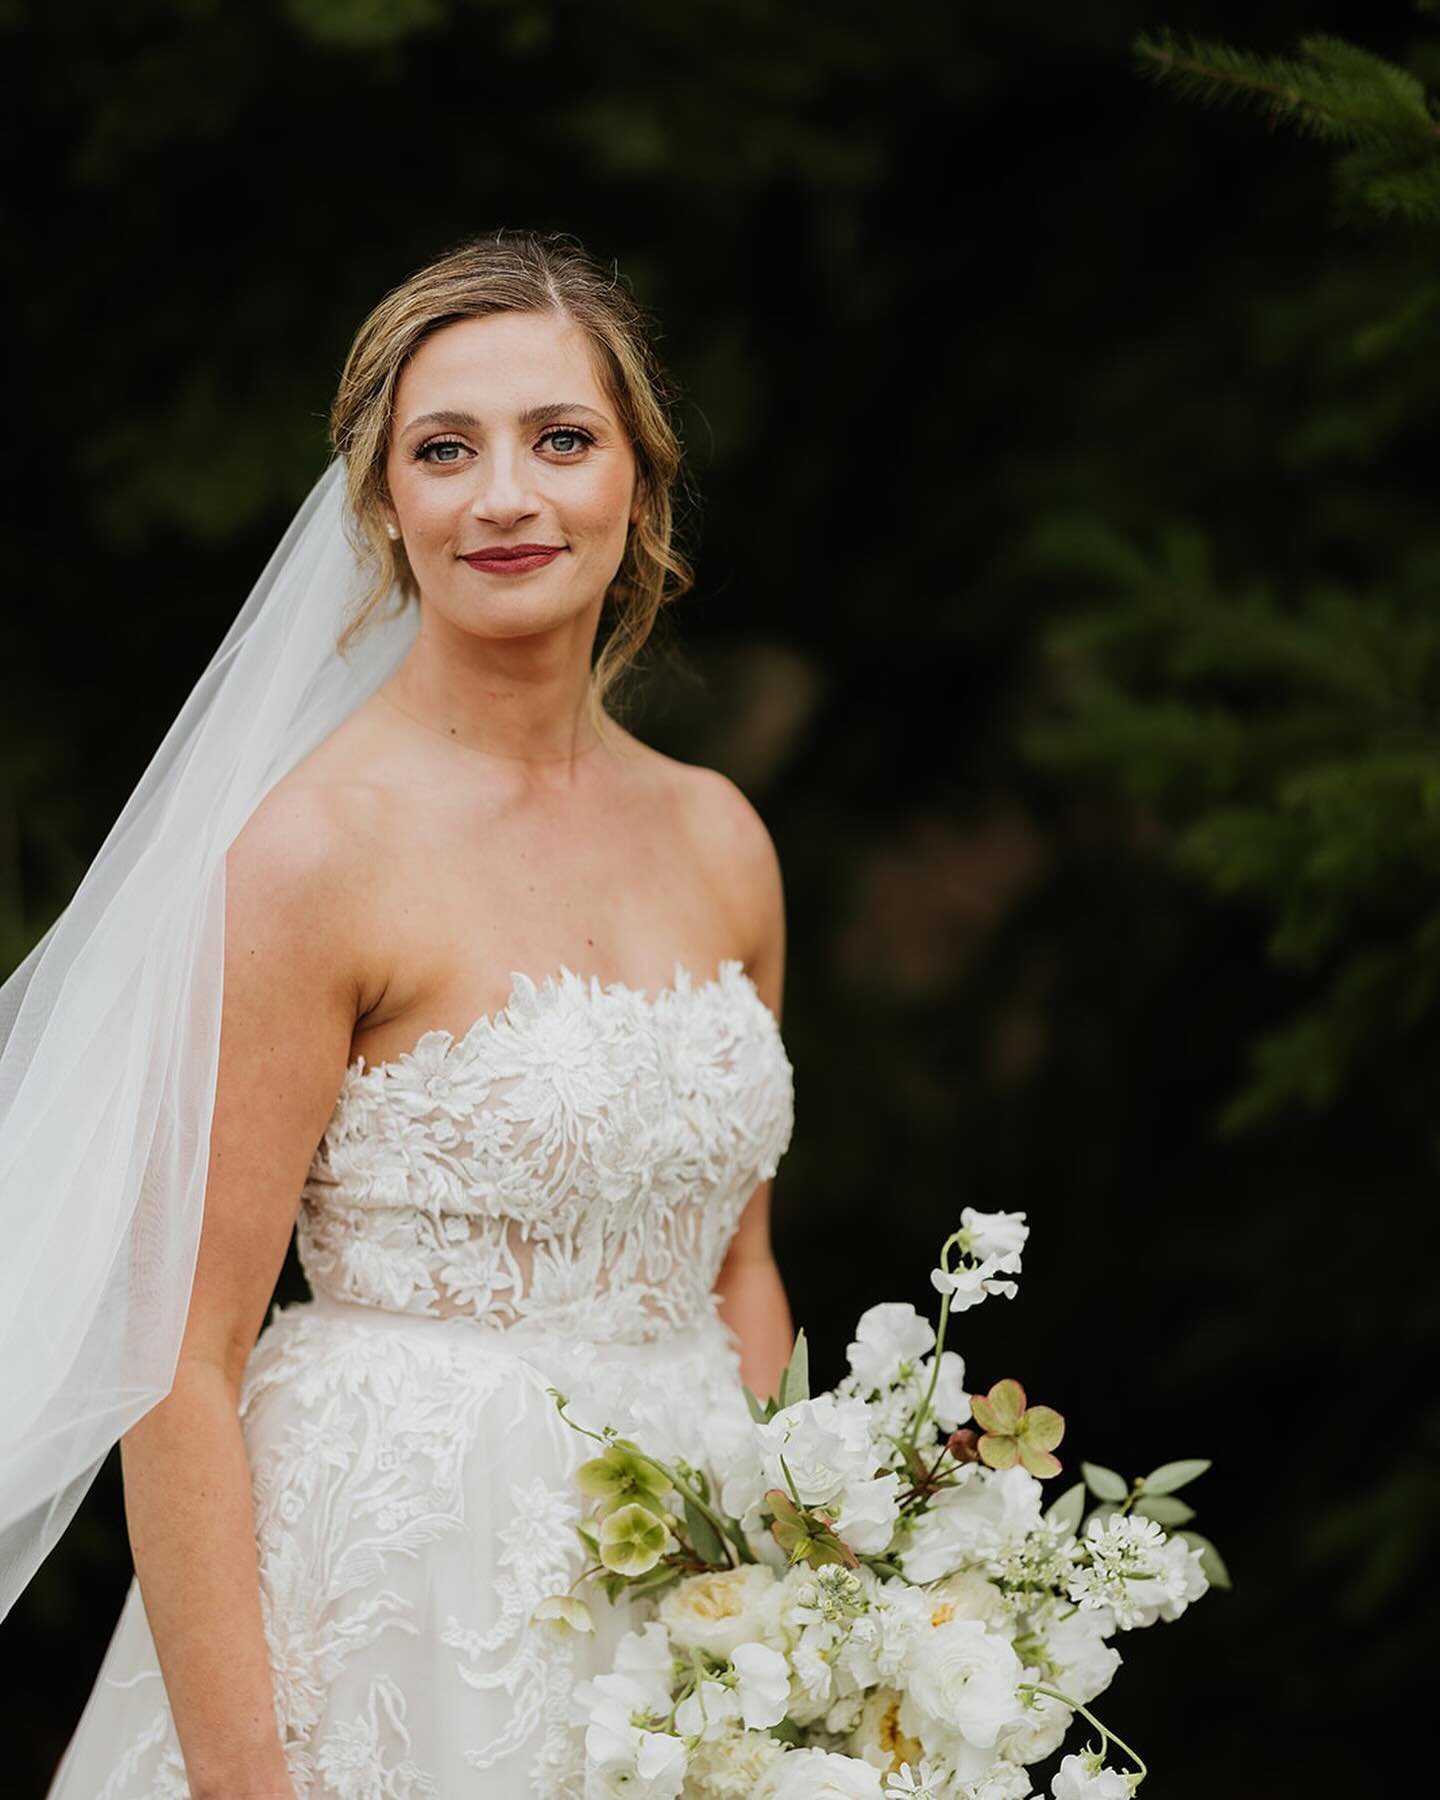 My goal as an artist is to create a look you&rsquo;ll feel absolutely gorgeous on your wedding day. Makeup that feels light, shows off your skin and doesn&rsquo;t change you dramatically. I am taking about flawless skin, eyes that pop, a soft lash an